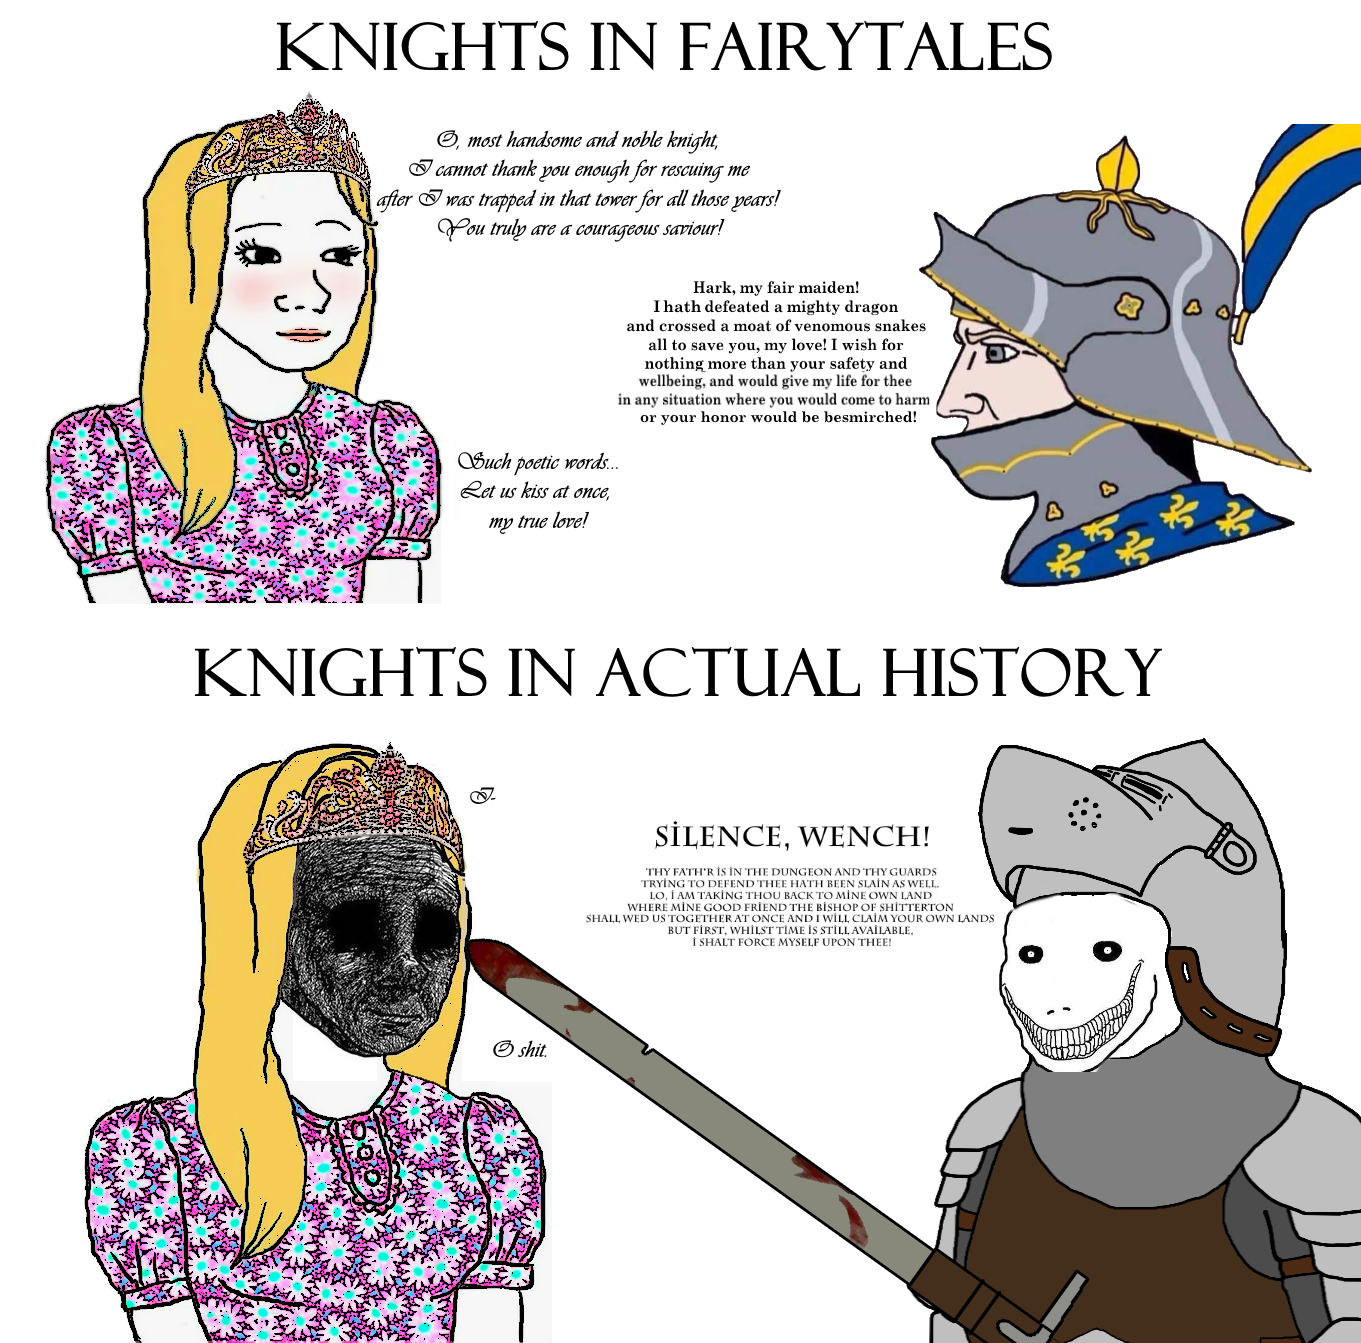 The more you study the Middle Ages, the more ***ed up it gets